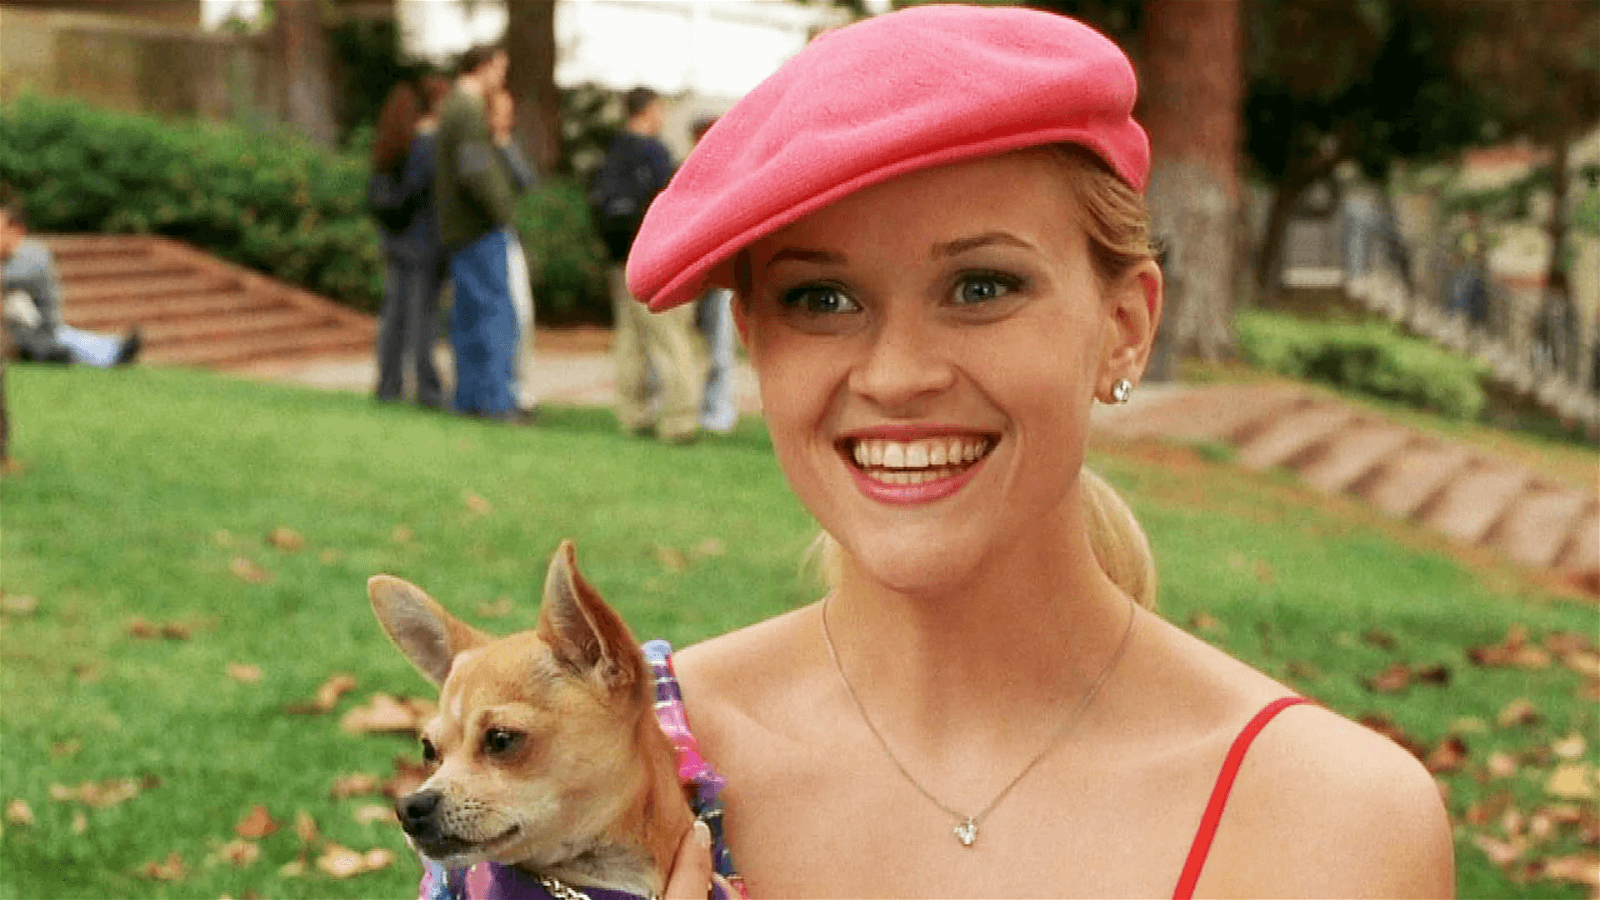 Reese Witherspoon in Legally Blonde